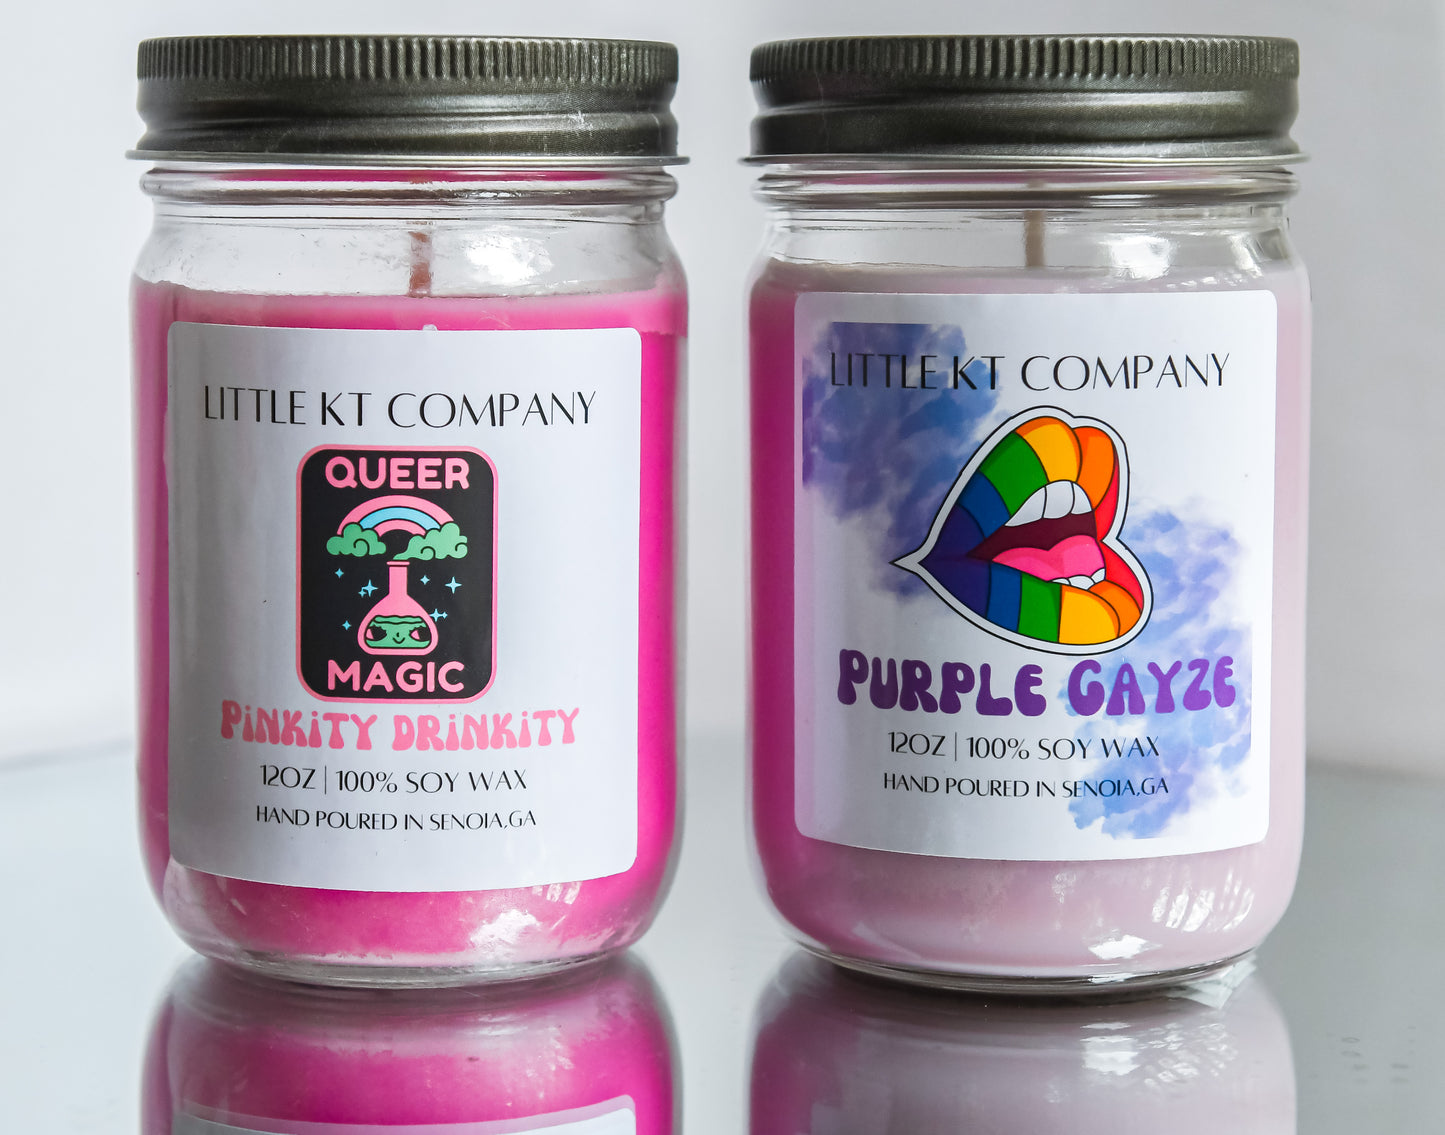 Queer Magic Pinkity Drinkity